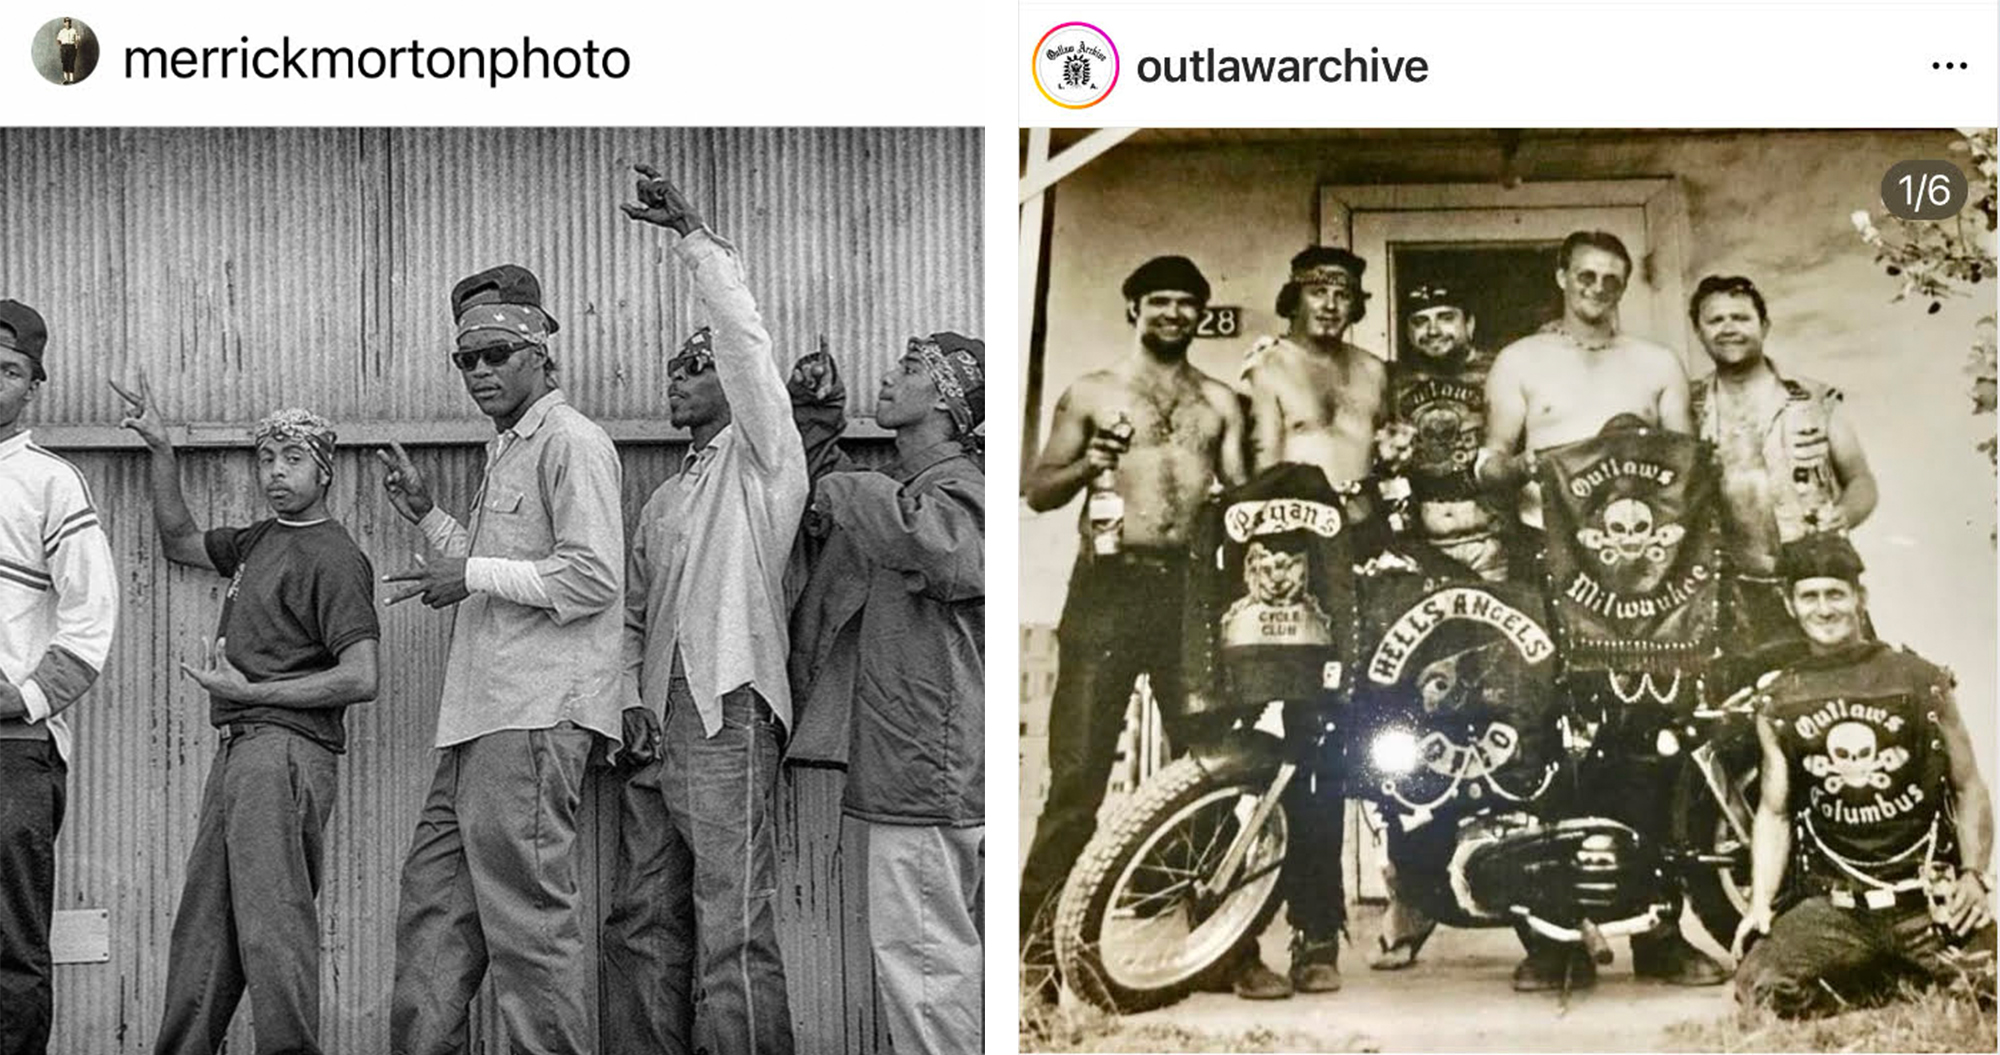 Screen shots from two different Instagram accounts: outlawarchive of the left and marrickmortonphoto on the right.